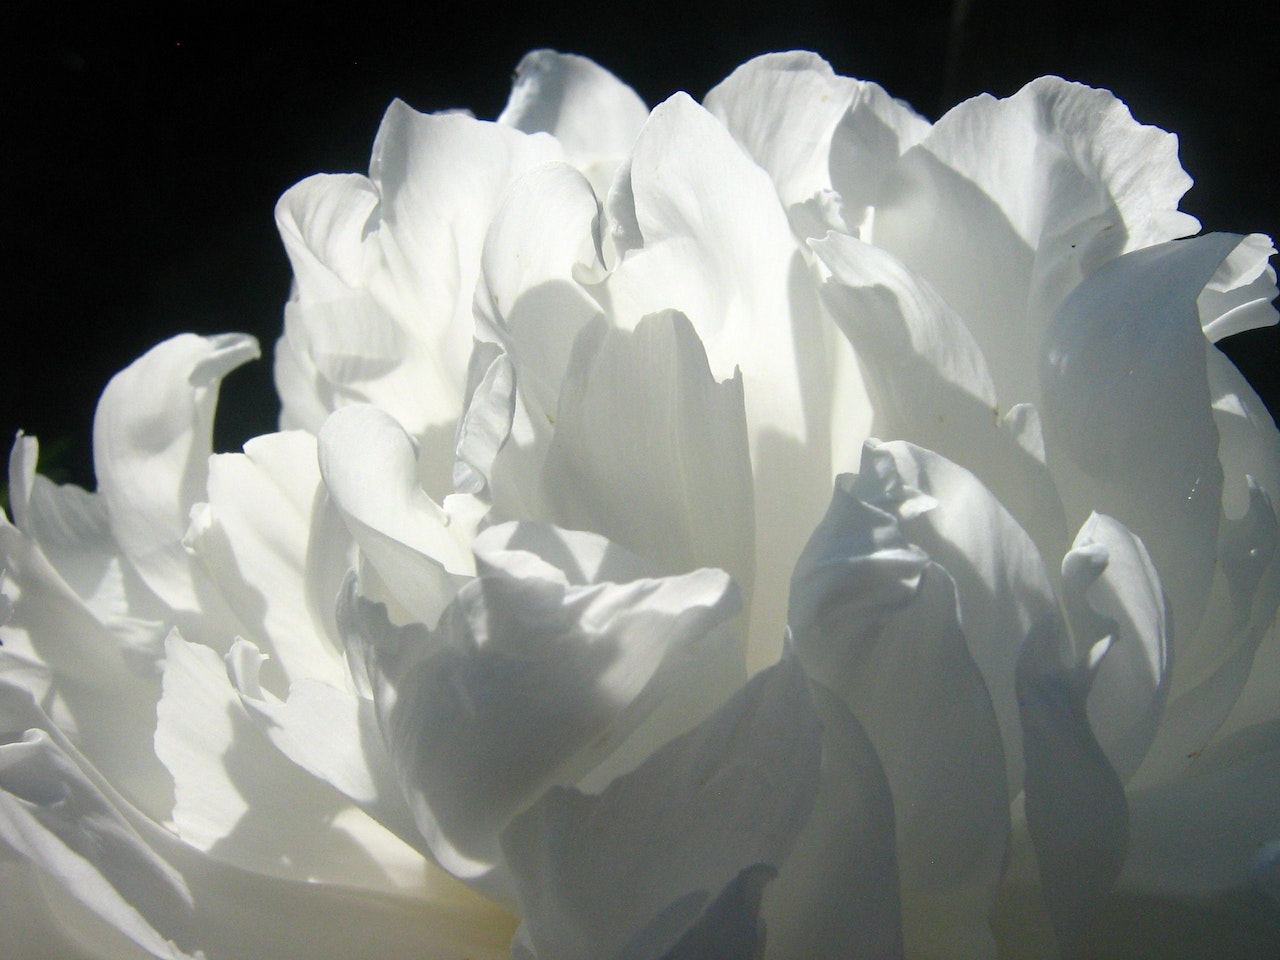 White Petals Of A Blooming Flower